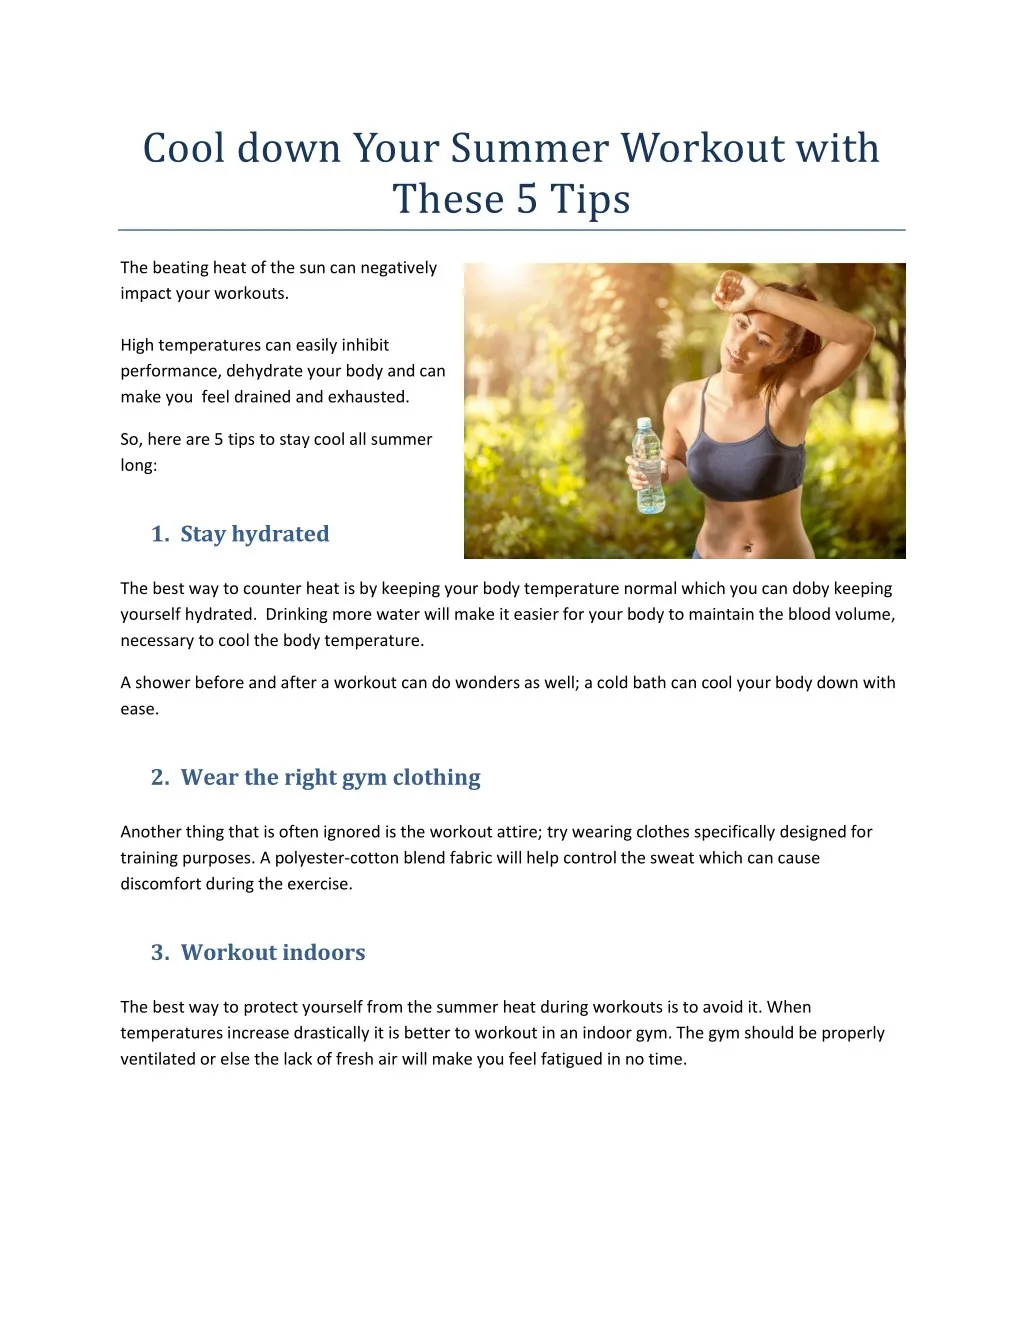 cool down your summer workout with these 5 tips